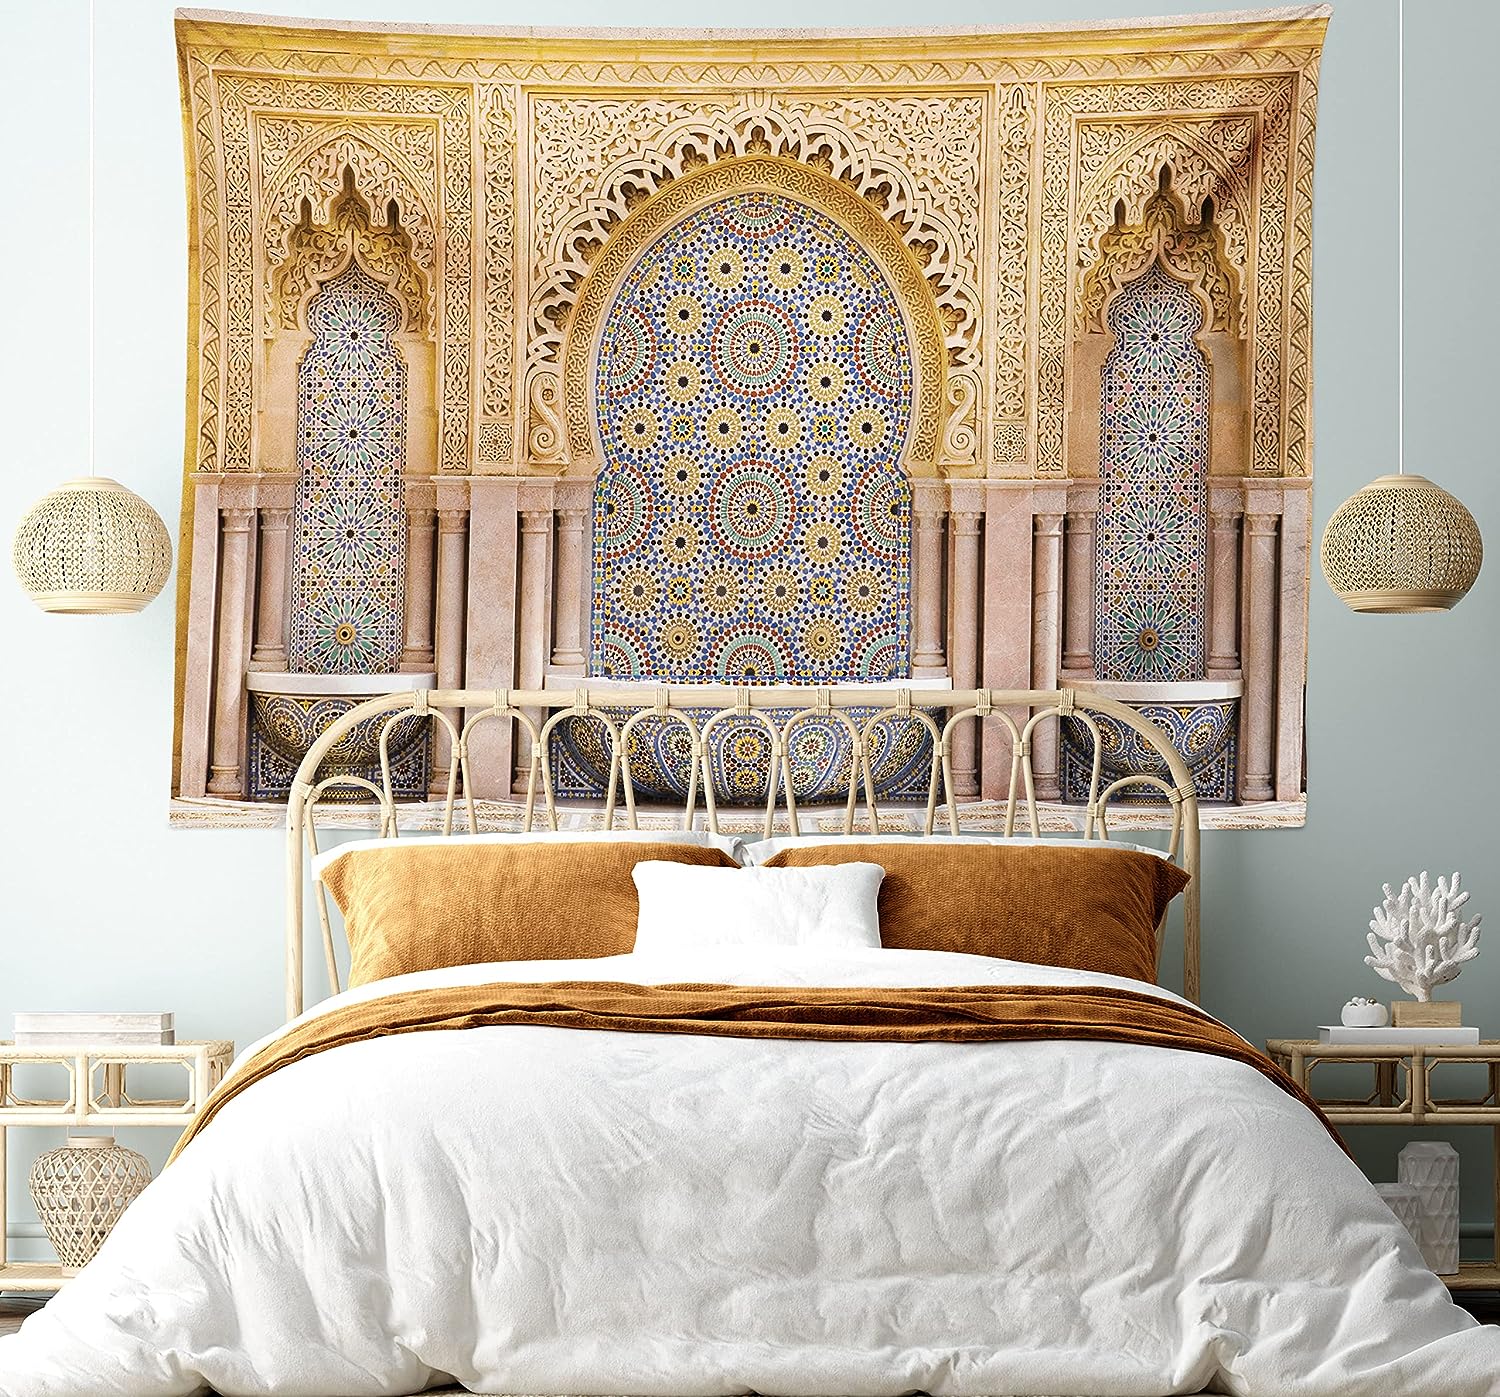 Typical Moroccan Tiled Tapestry